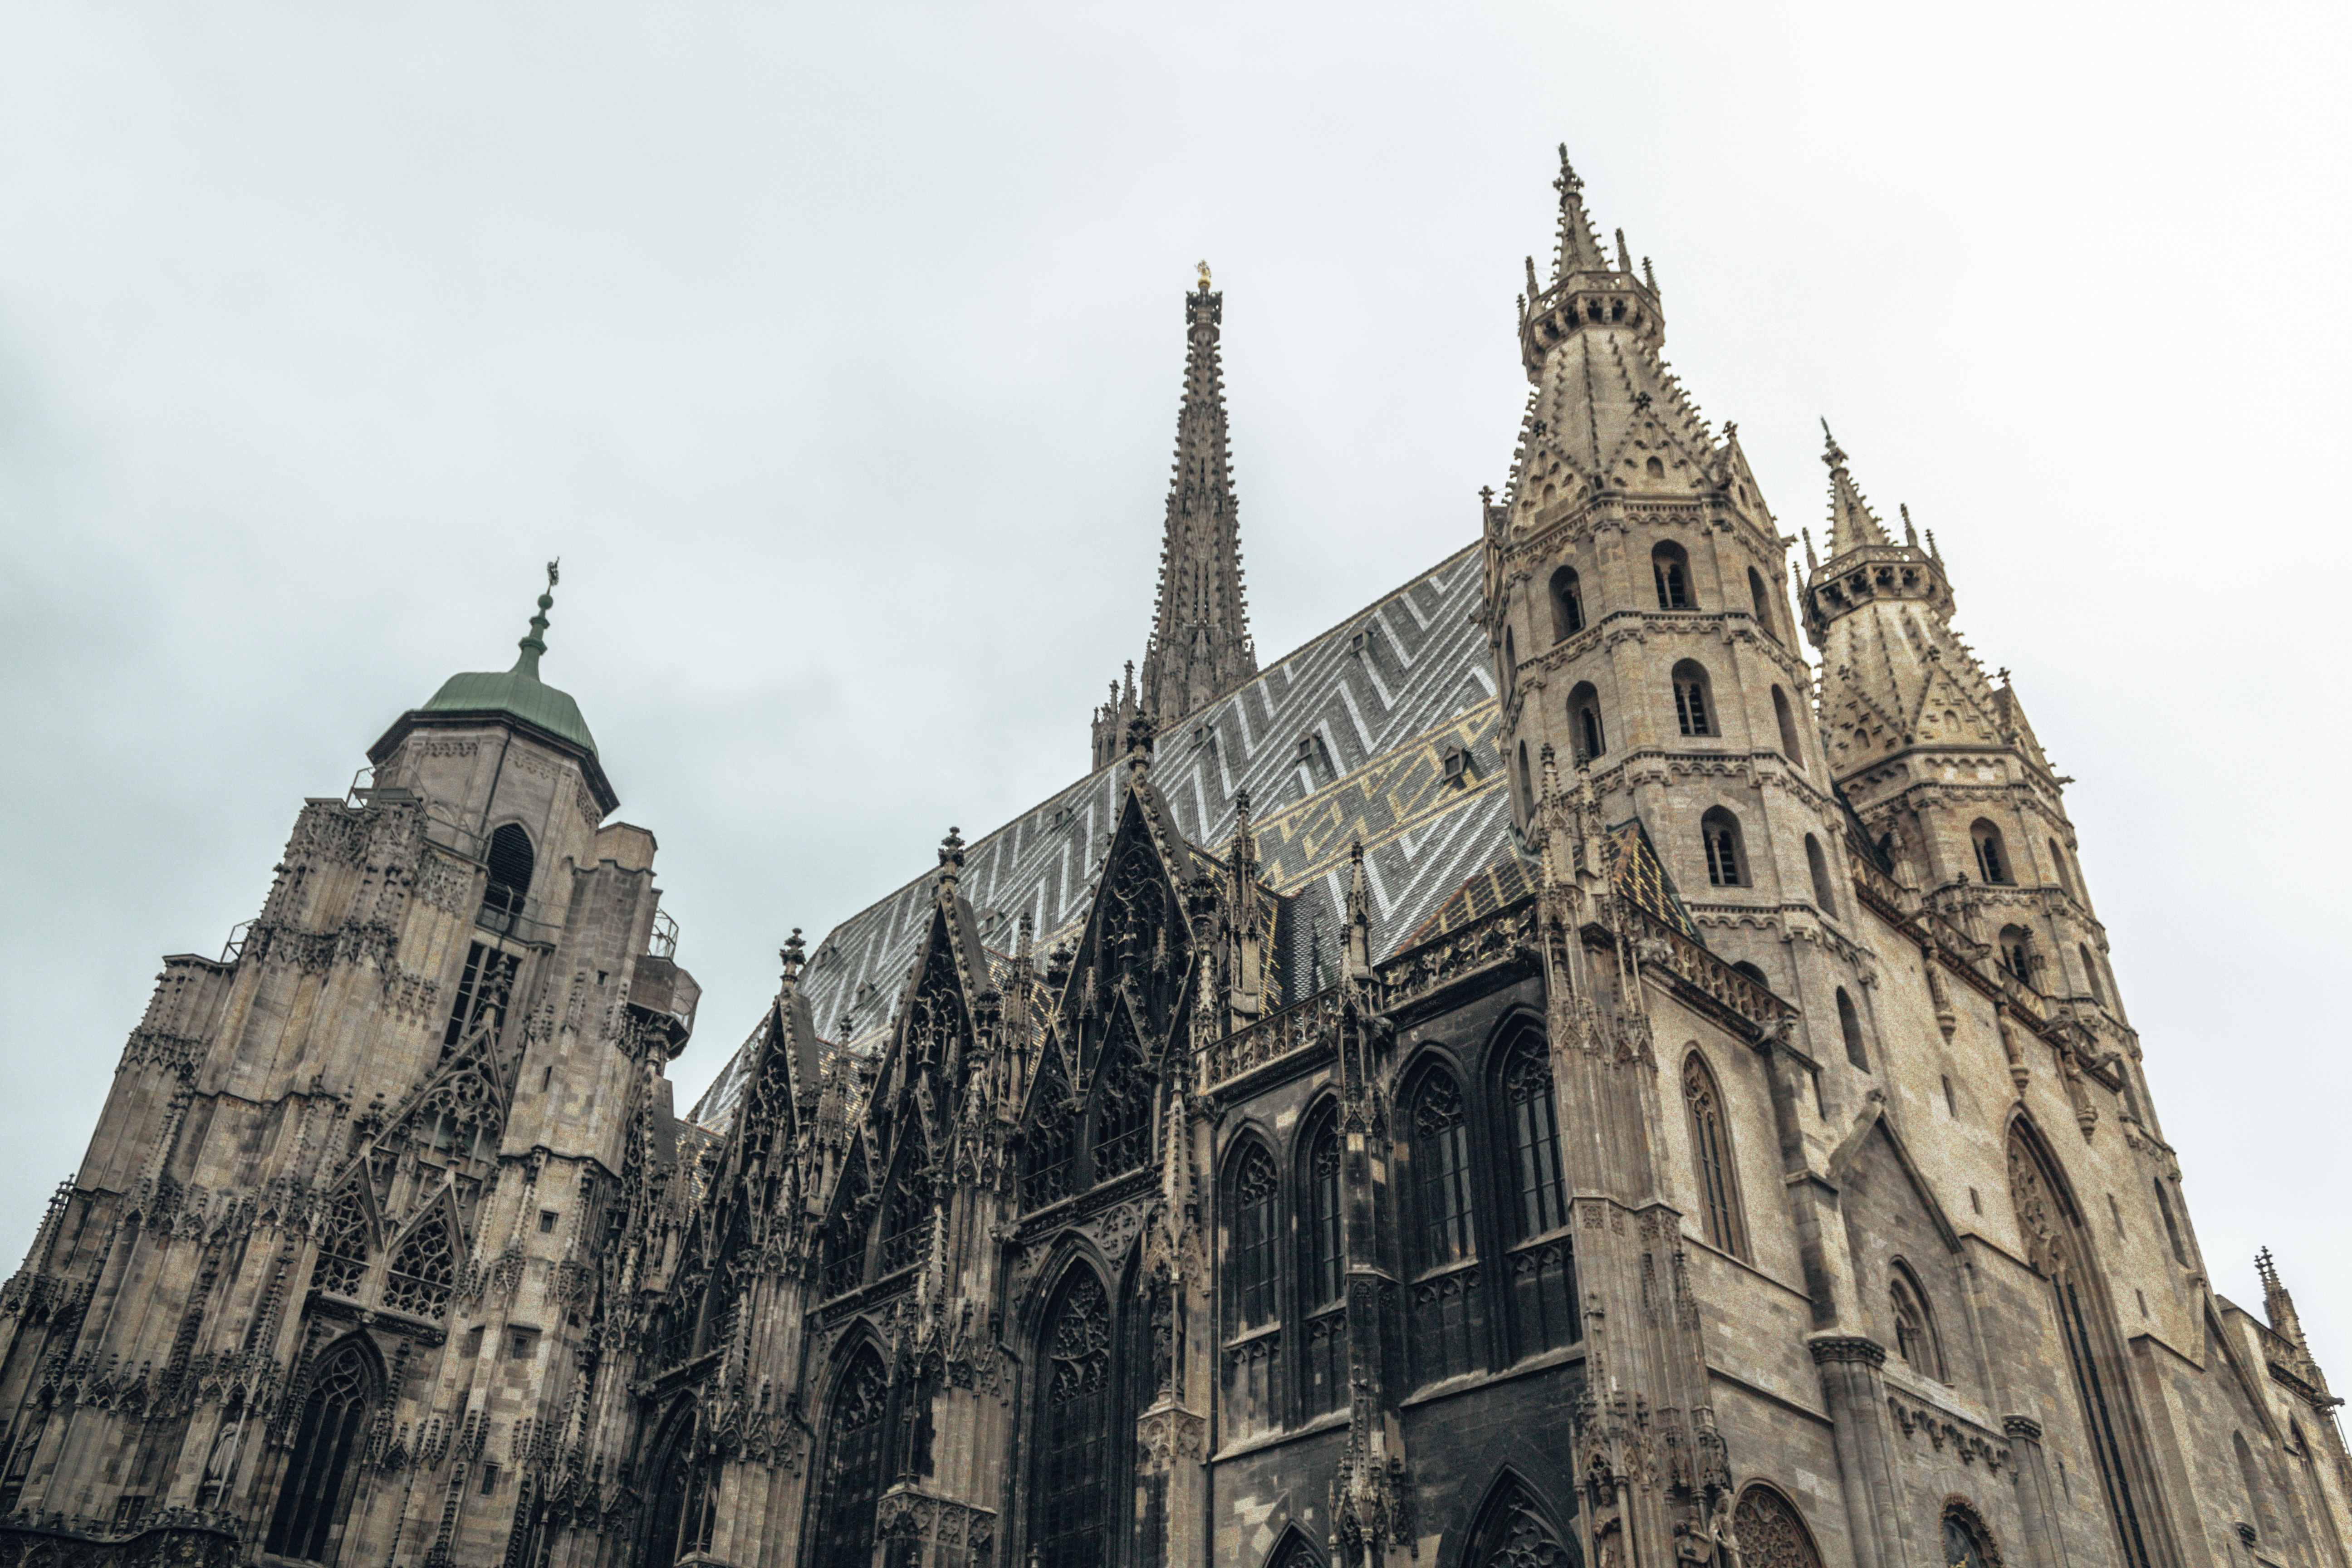 The famous St-Stephen's Cathedral in Vienna, Austria